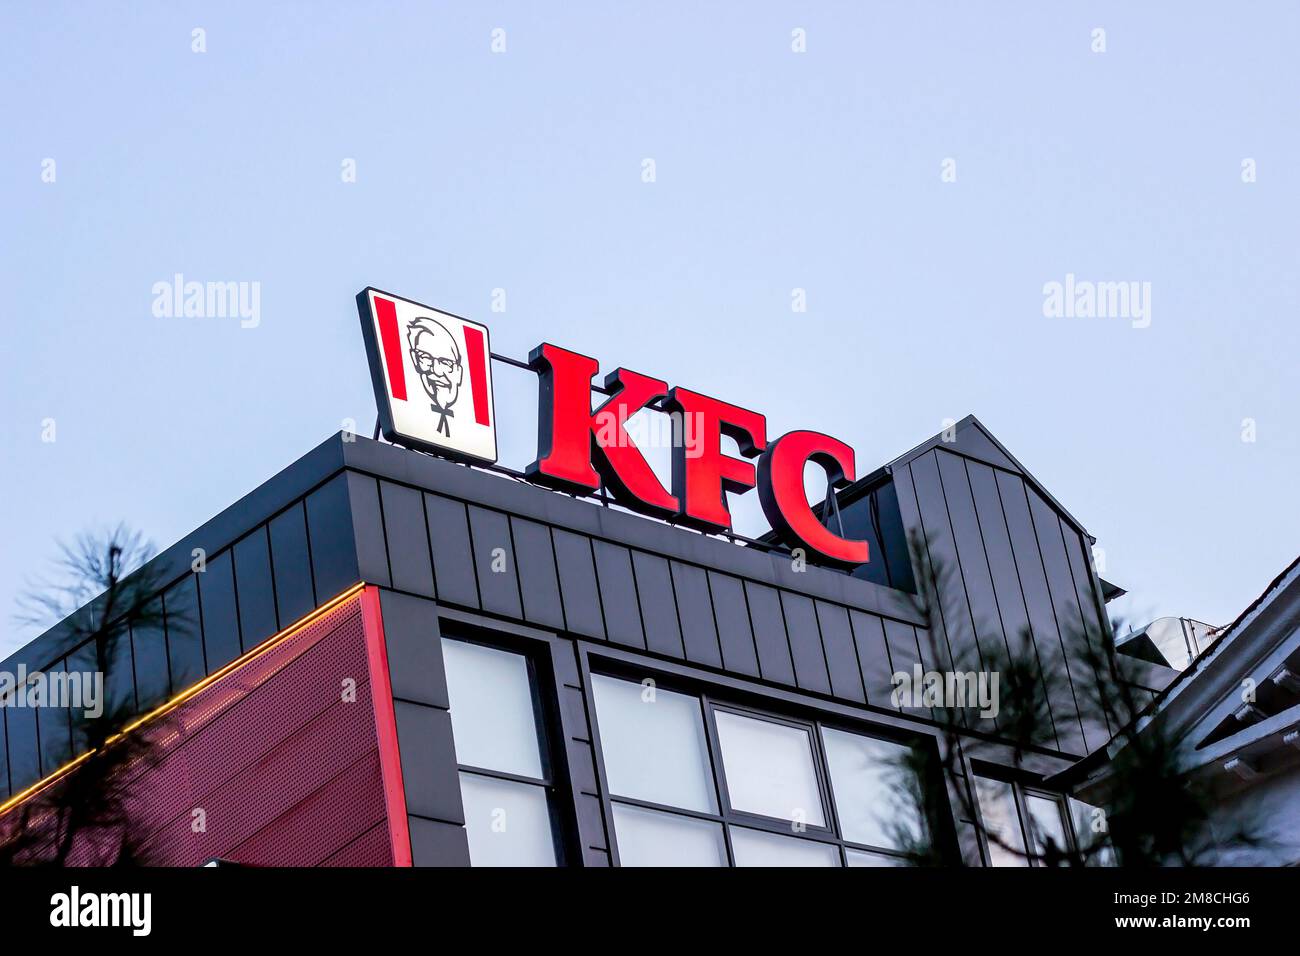 DUSHANBE, TAJIKISTAN - JULY 28, 2022: Red KFC fast food restaurant logo with Colonel Sanders against the blue sky. Stock Photo